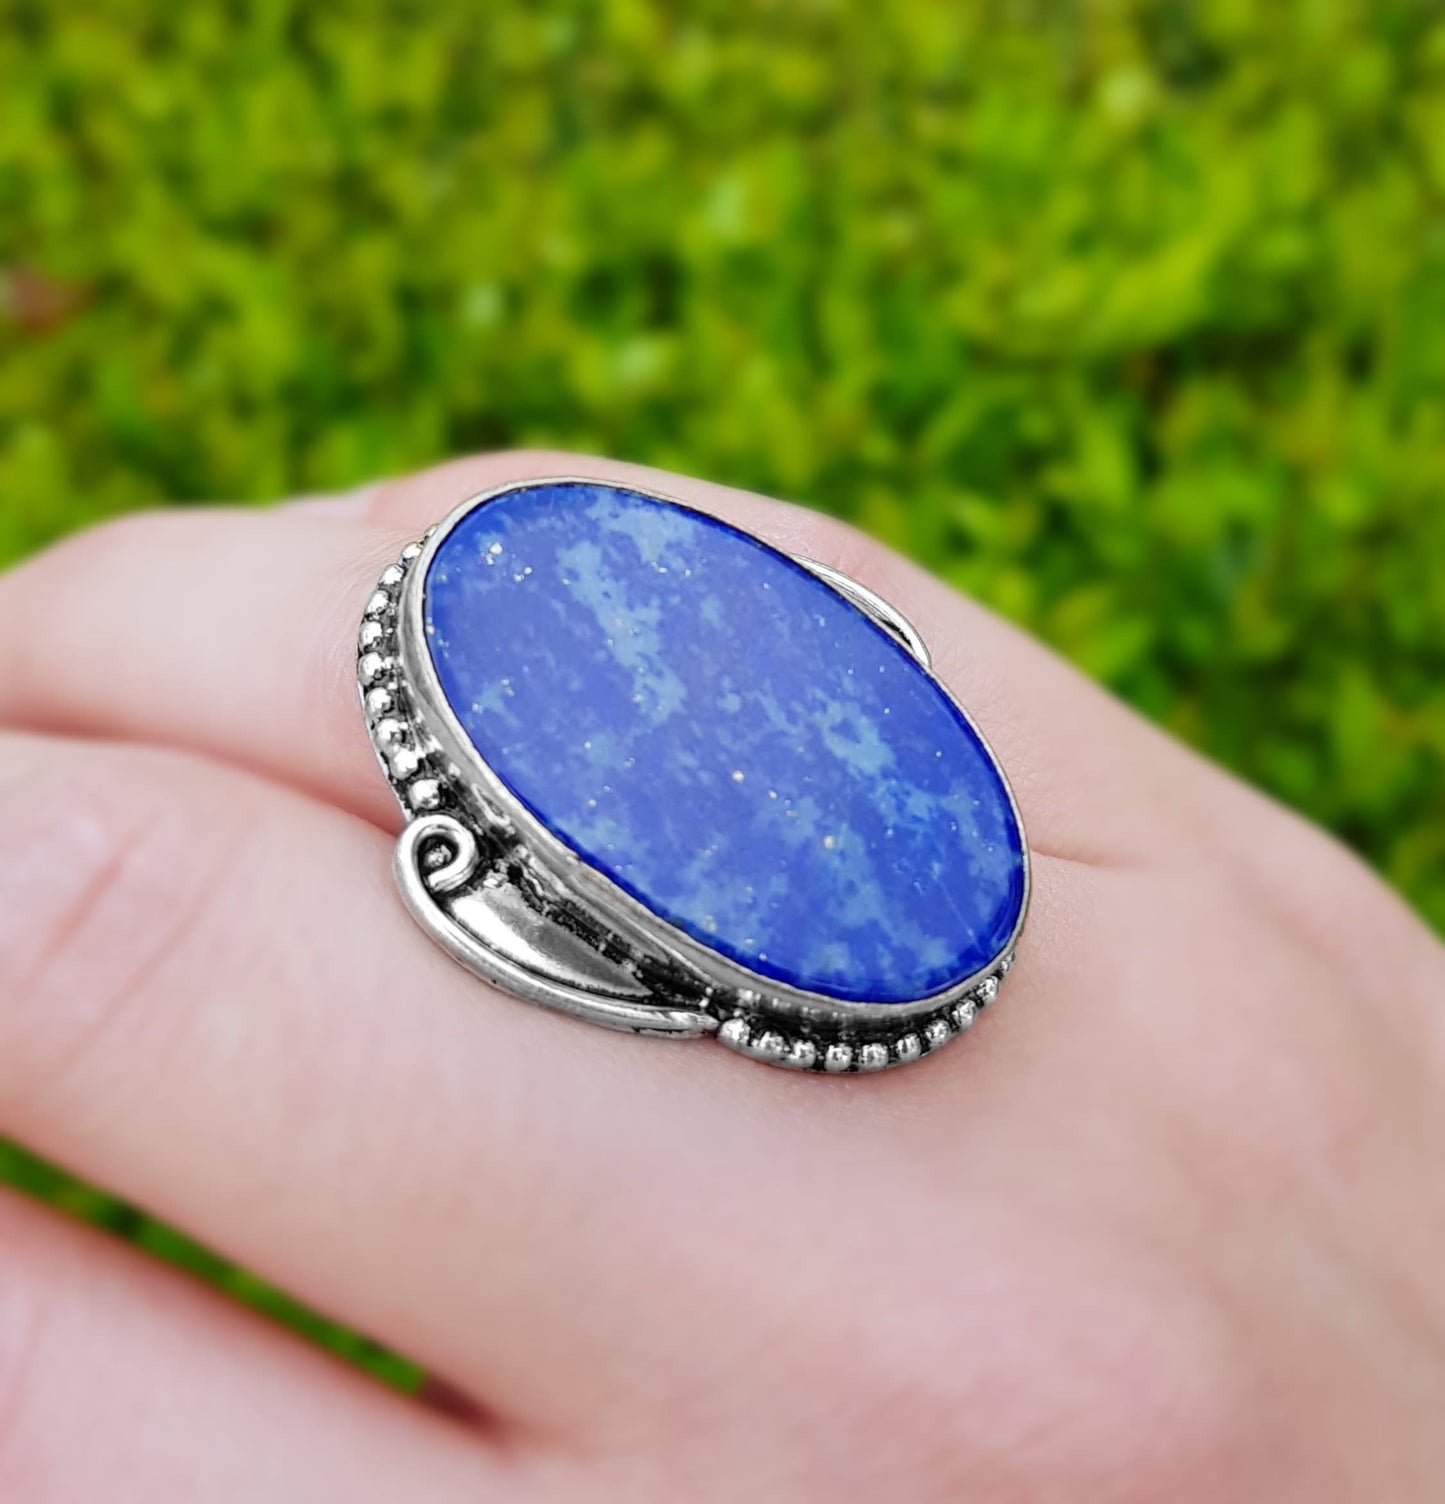 Lapis Lazuli Ring In Sterling Silver Size US 7 1/2 Big Statement Ring Boho Crystal Rings GypsyJewelry Unique Gift For Women